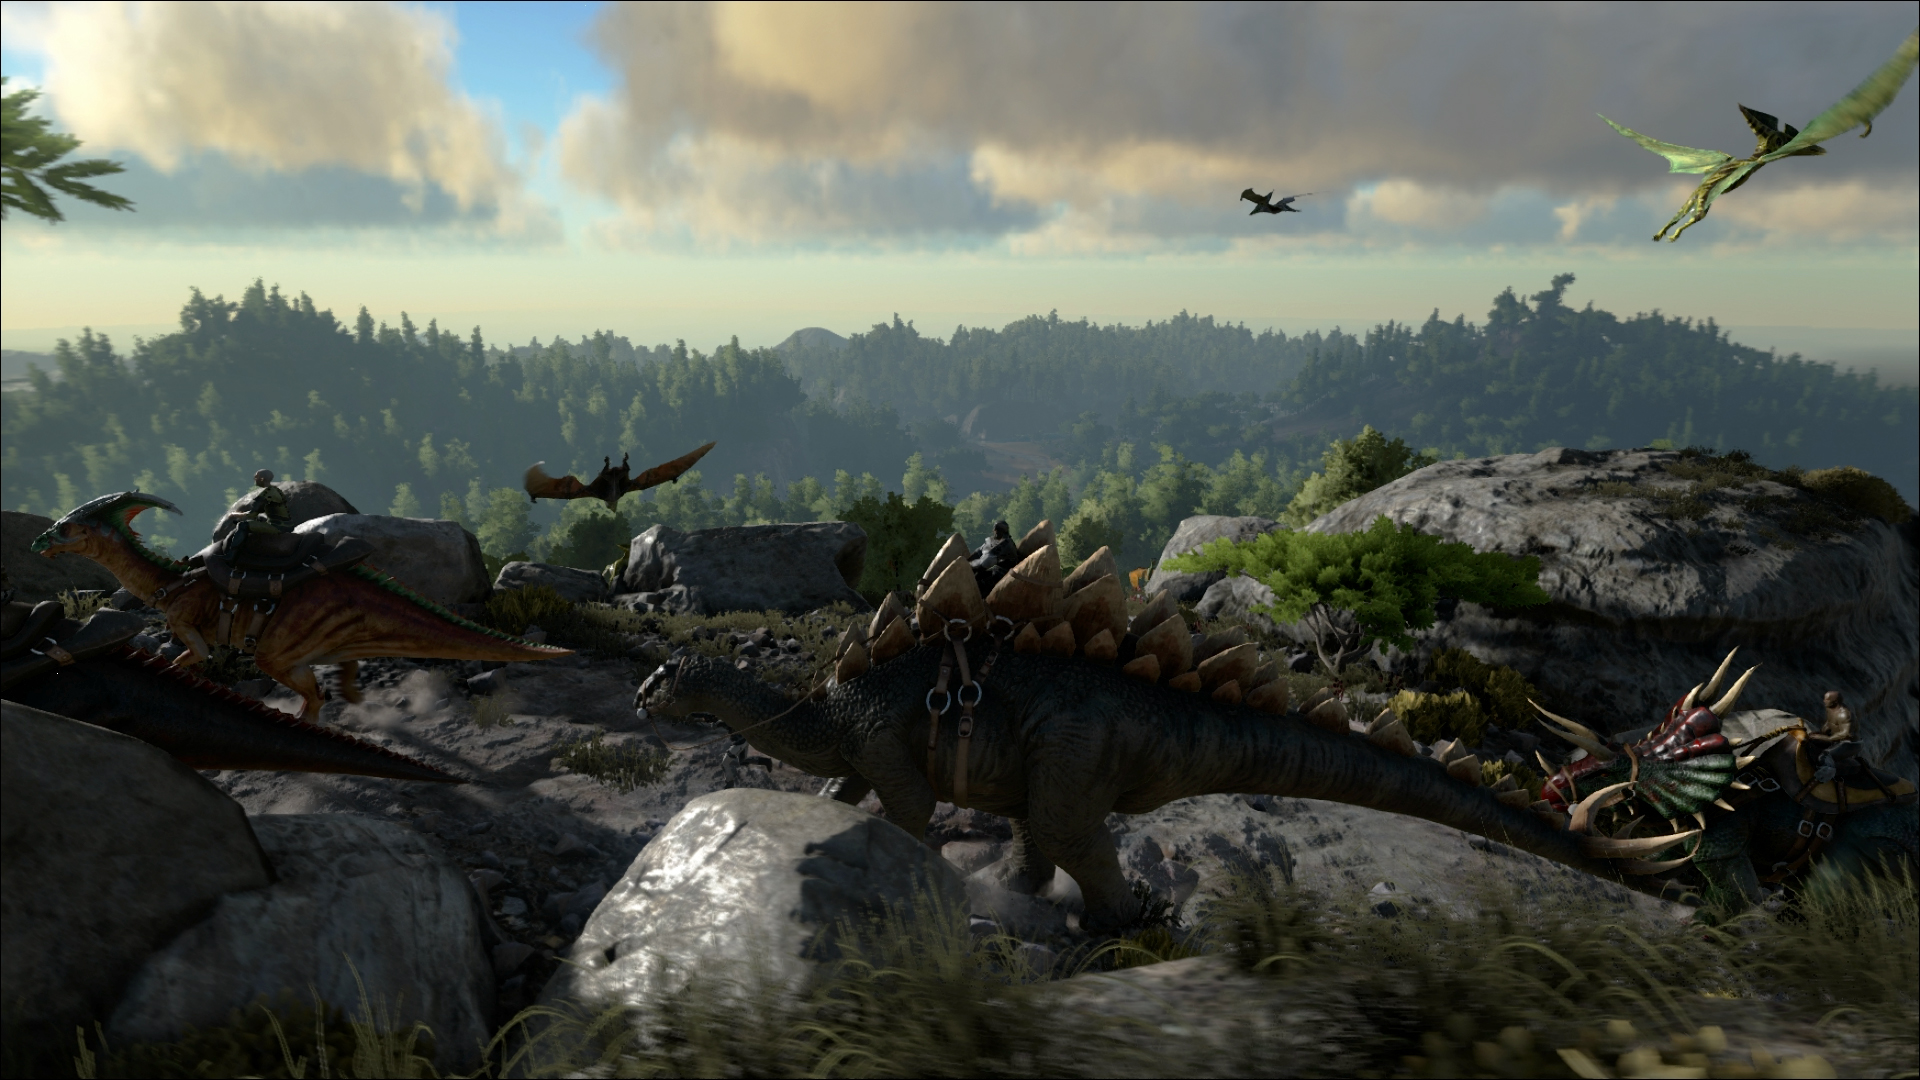 Ark: Survival Evolved game is announced - Game News ... - 1920 x 1080 jpeg 1121kB